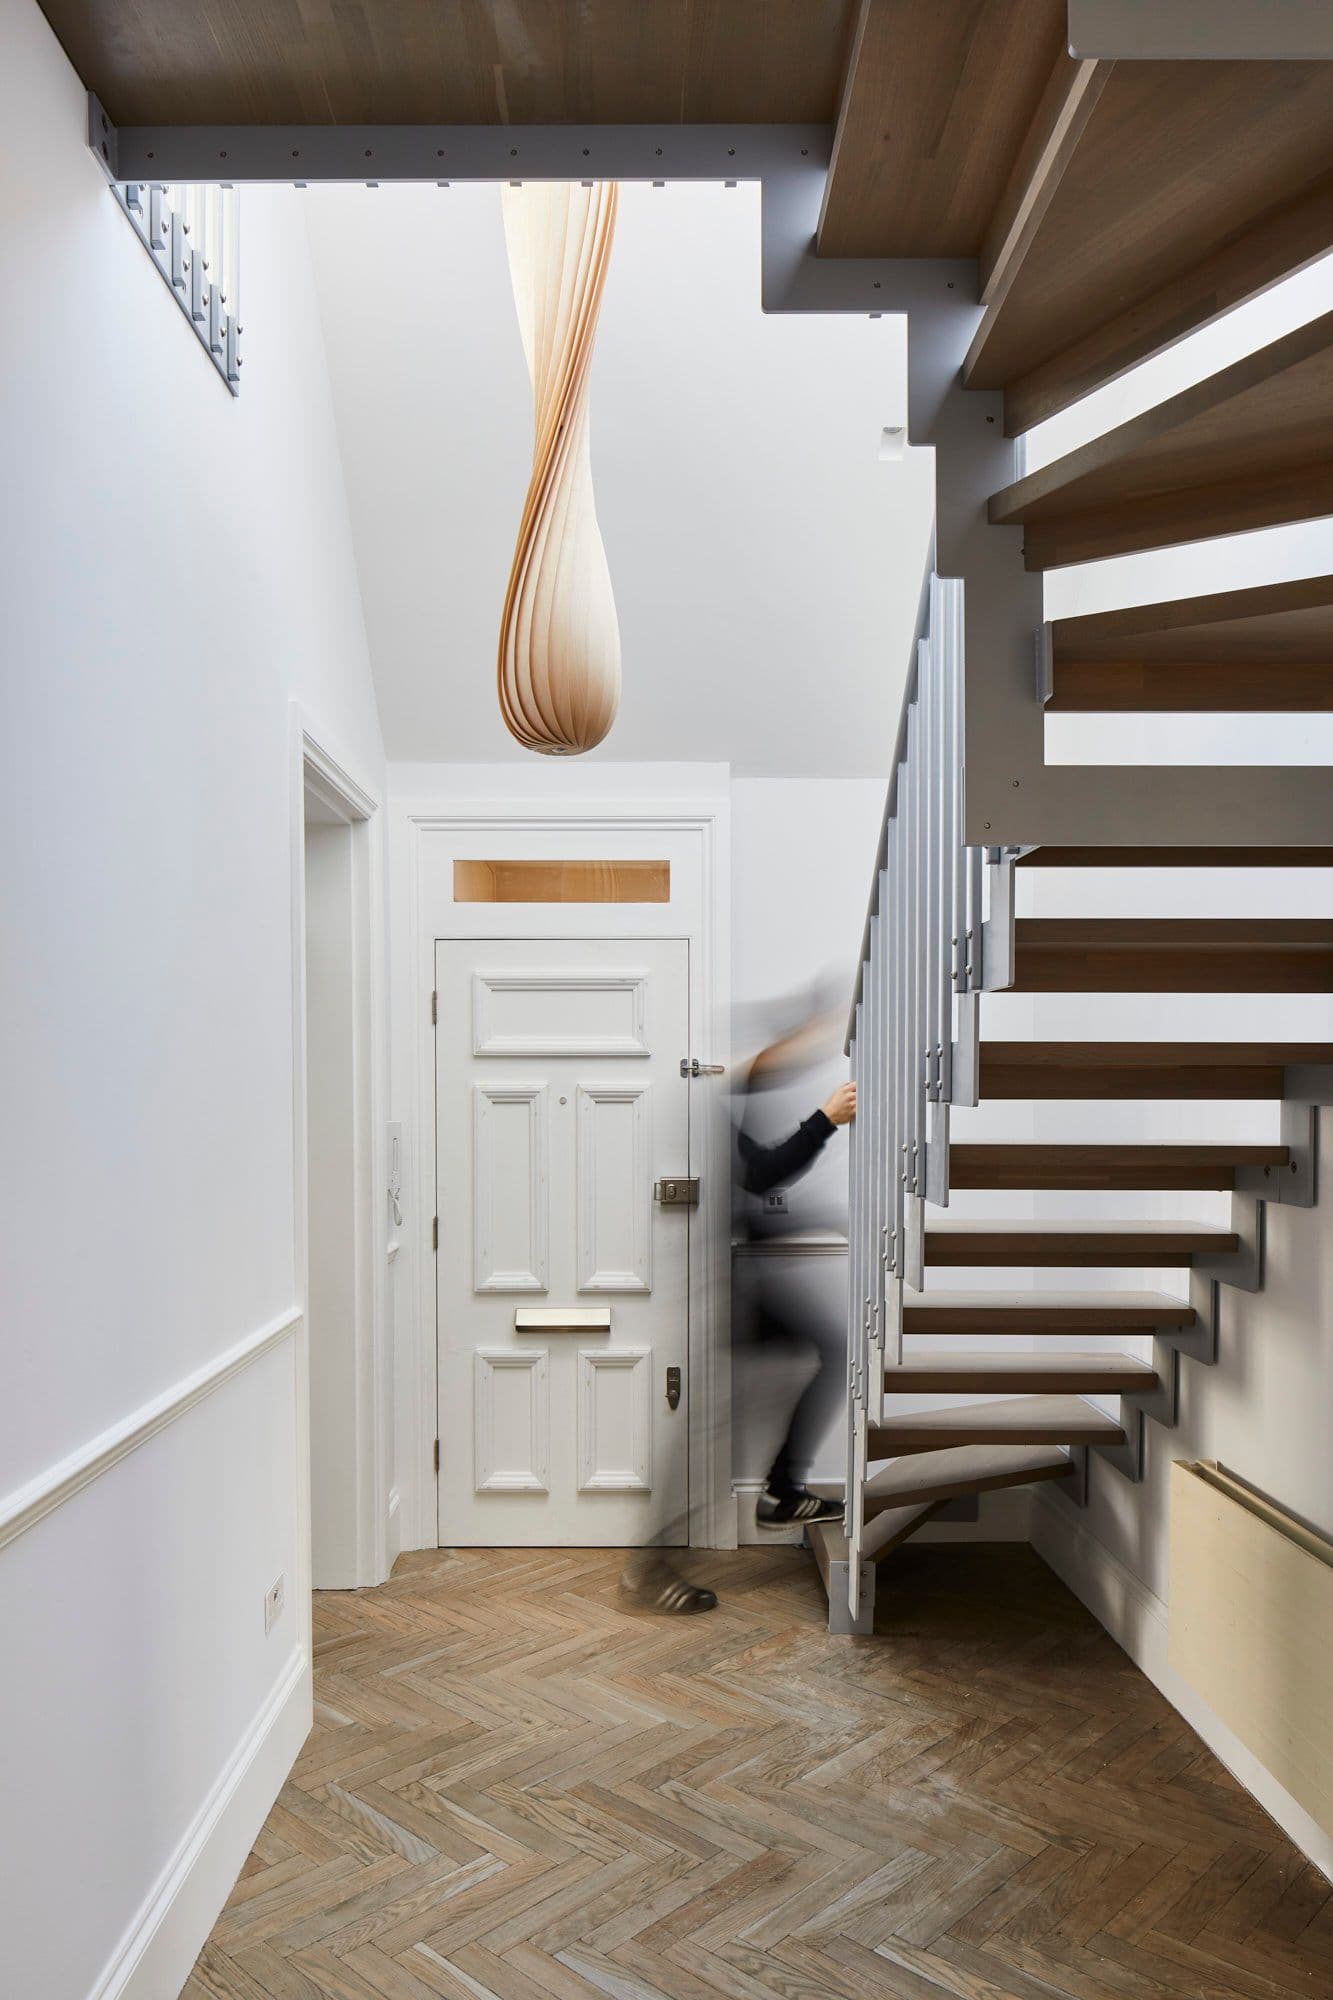 BPM17-Victorian-Penthouse-London-Chiswick-Hallway-Front-Door-Italian-Staircase-Herring-Bone-Parquet-with-Visitor_scaled.jpeg